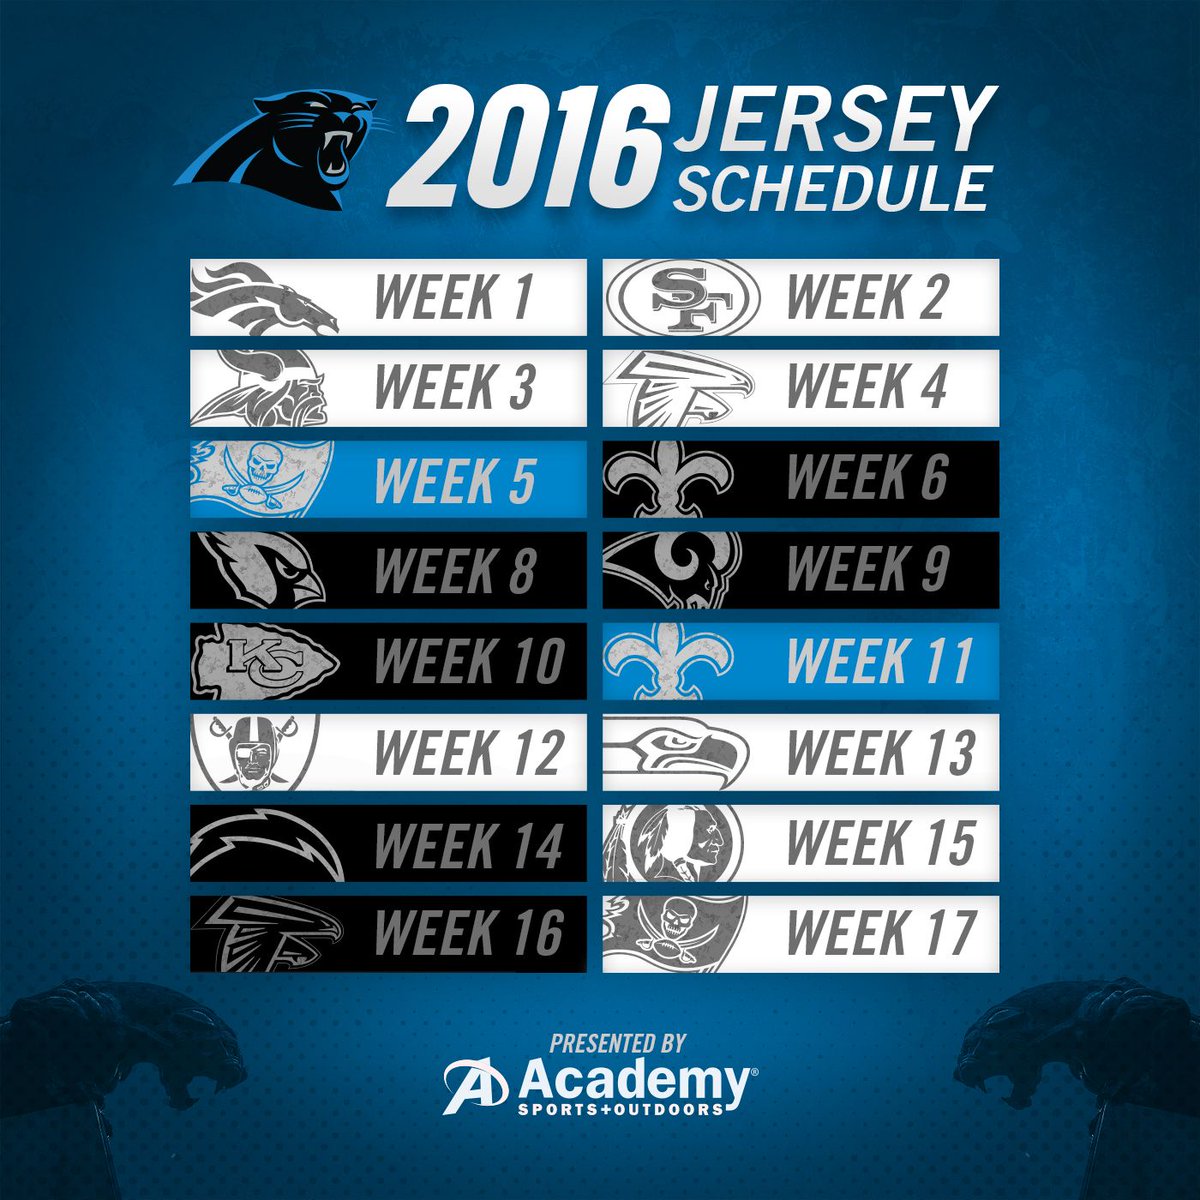 Carolina Panthers on X: 'The #Panthers 2016 jersey schedule is